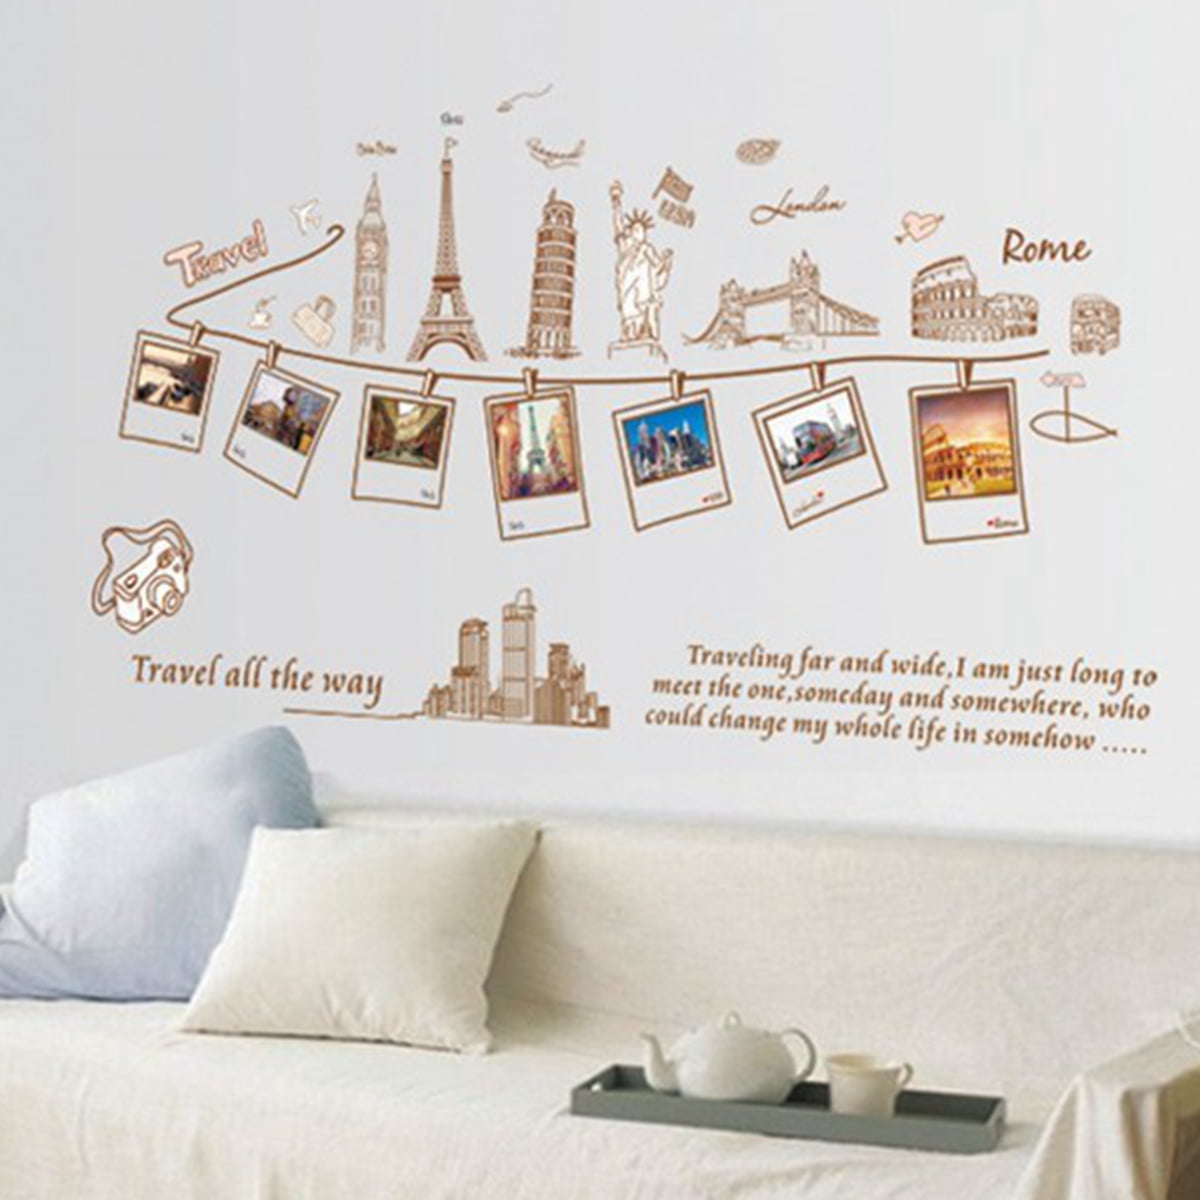 Vinyl Home Room Decor Art Quote Wall Decal Stickers Bedroom Removable Mural DIY 